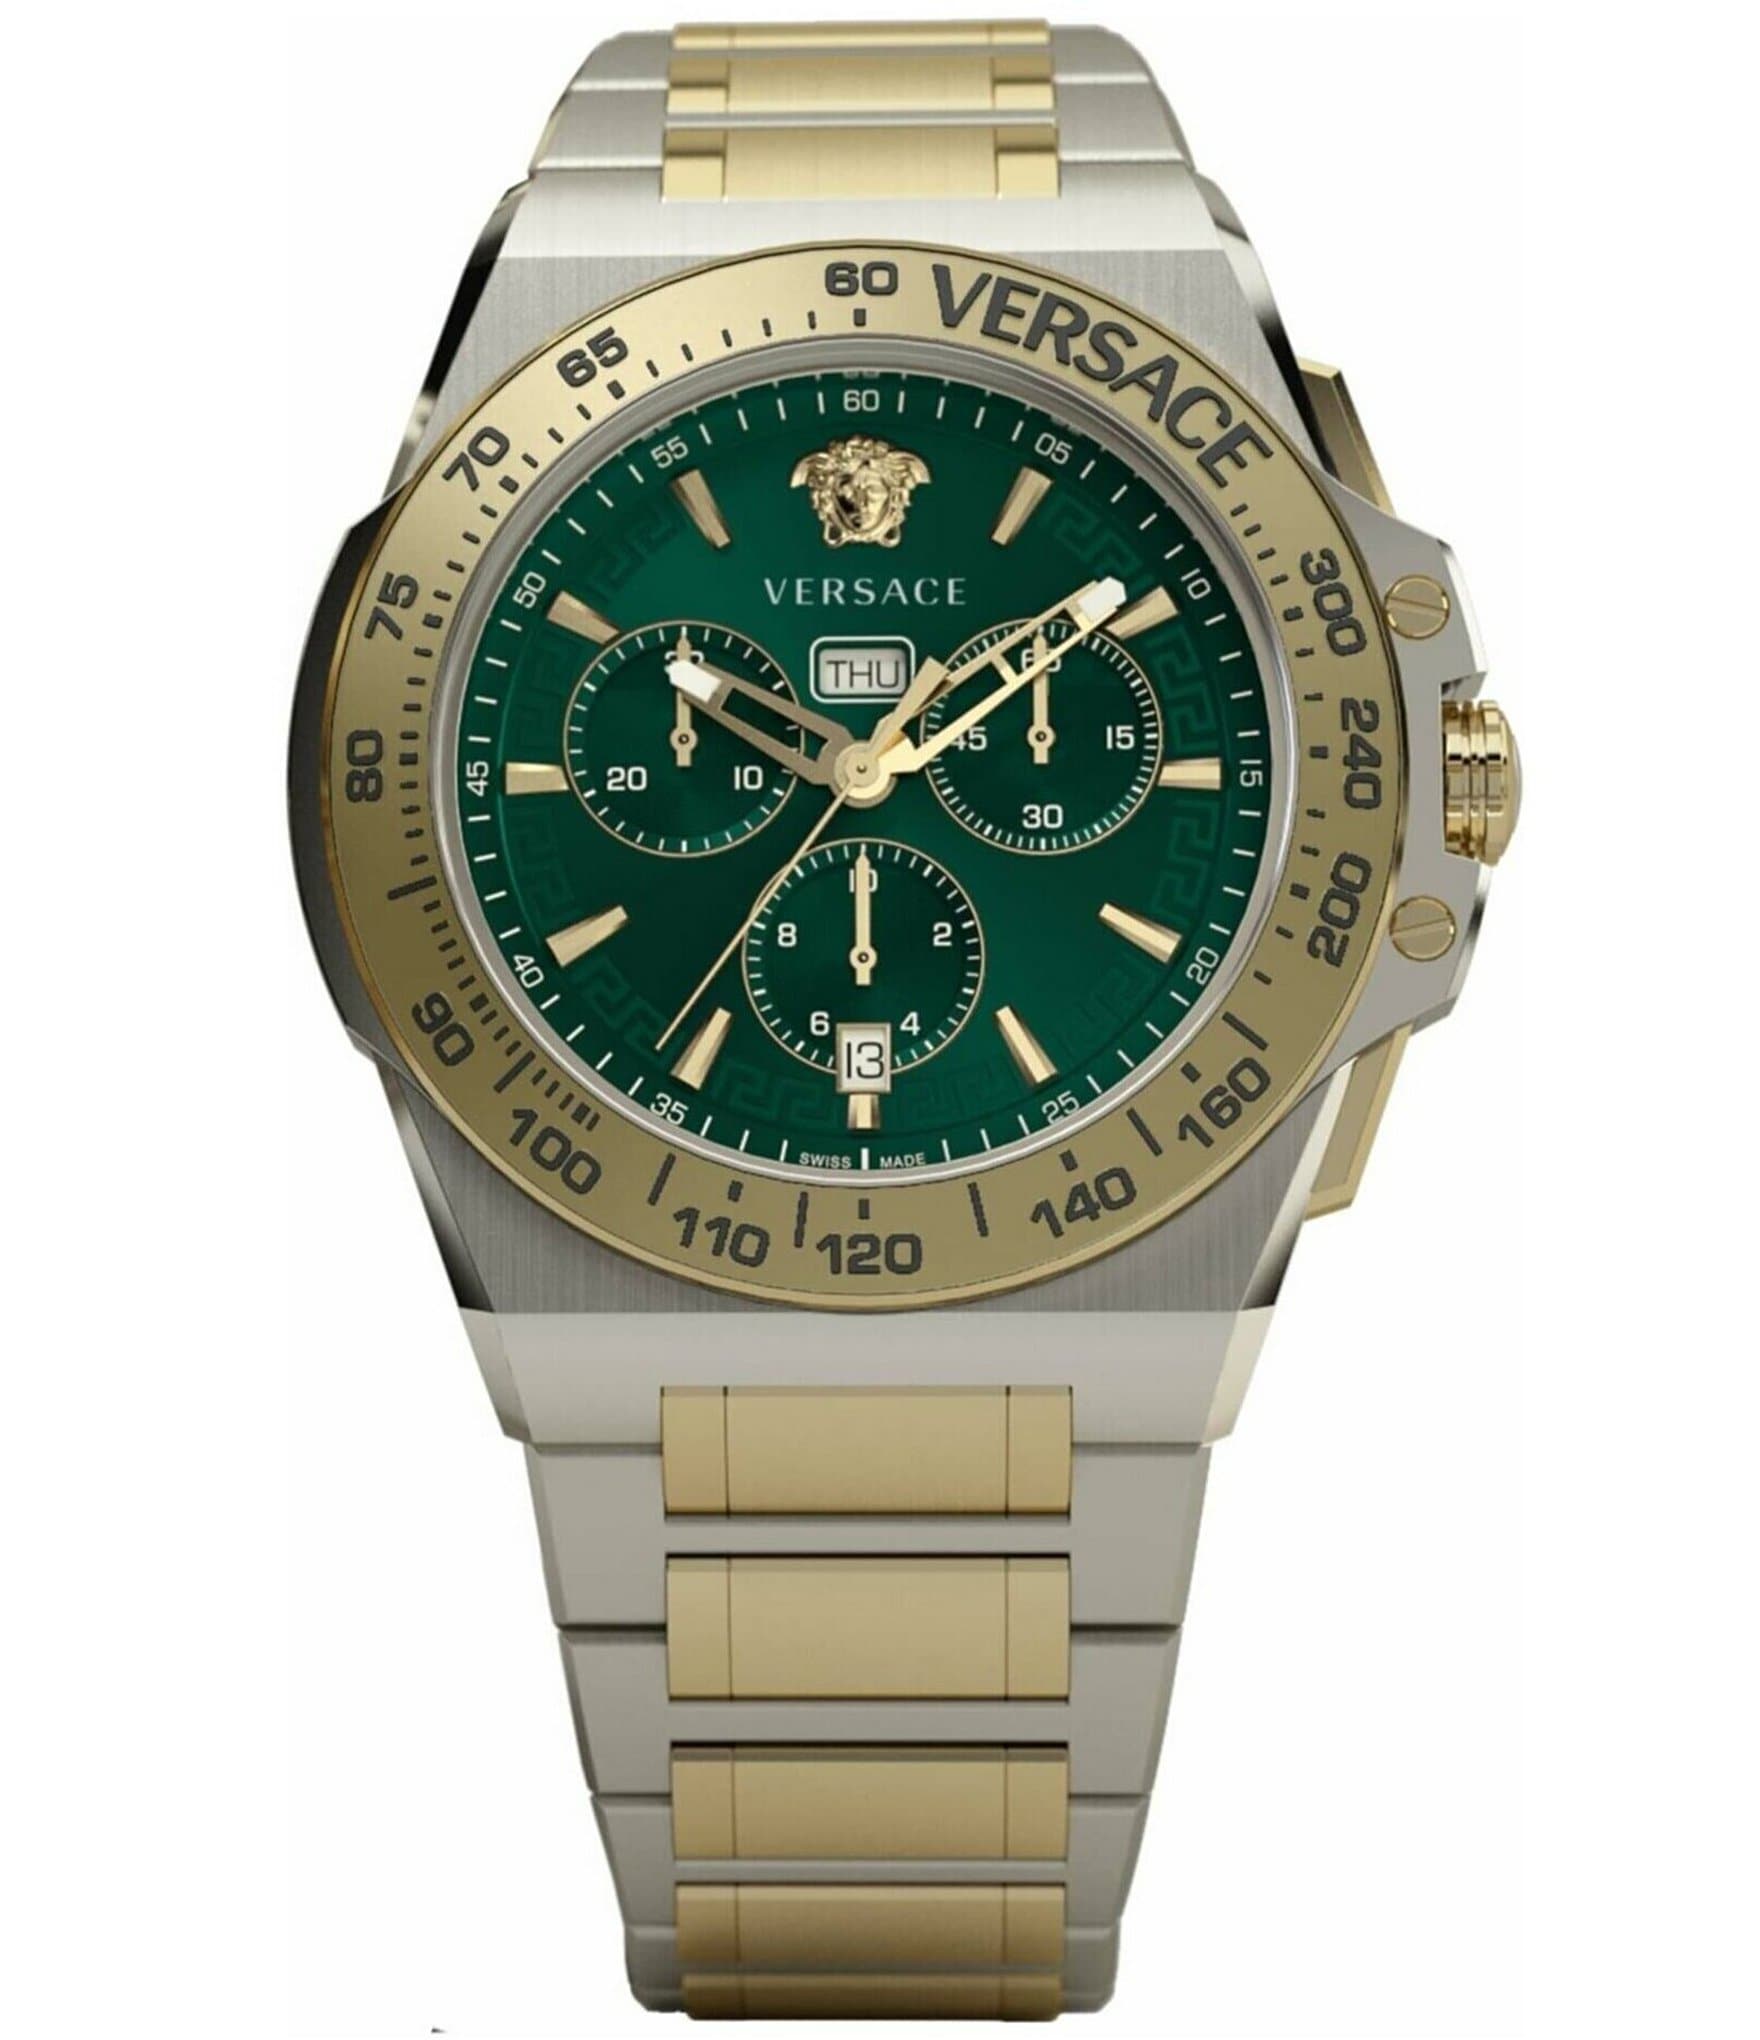 Versace Men's Greca Extreme Chronograph Two Tone Stainless Steel